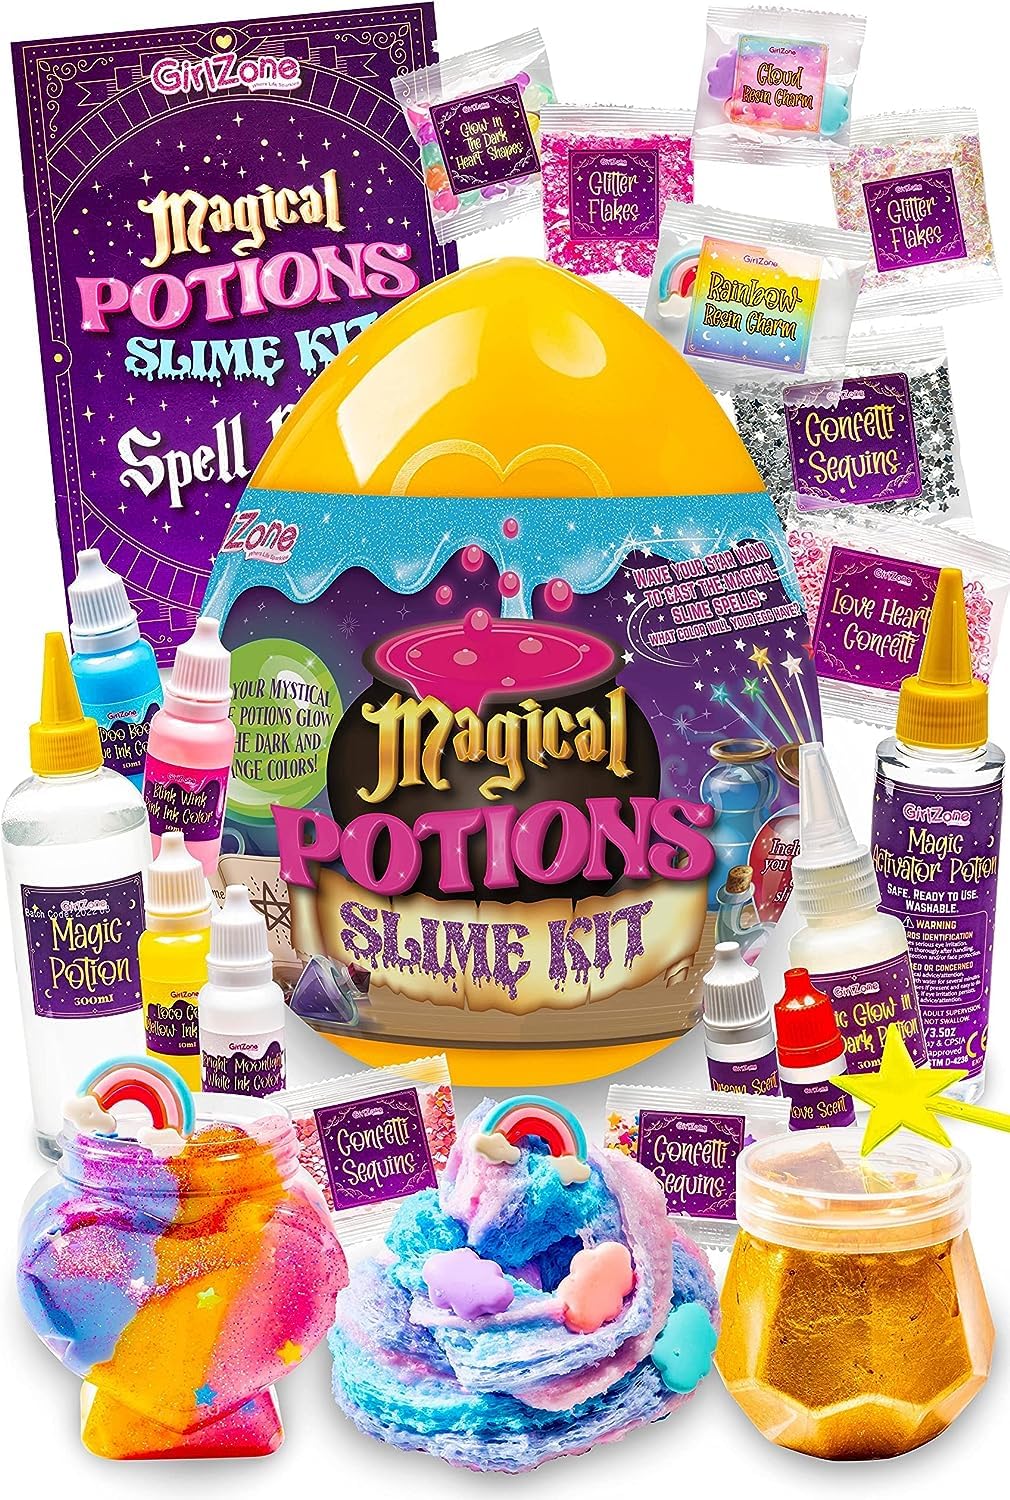 GirlZone Magic Potion Slime Kit, Spell-Binding Potion Making Kit for Girls  to Make 6 Magical Mixies with Secret Ingredients and